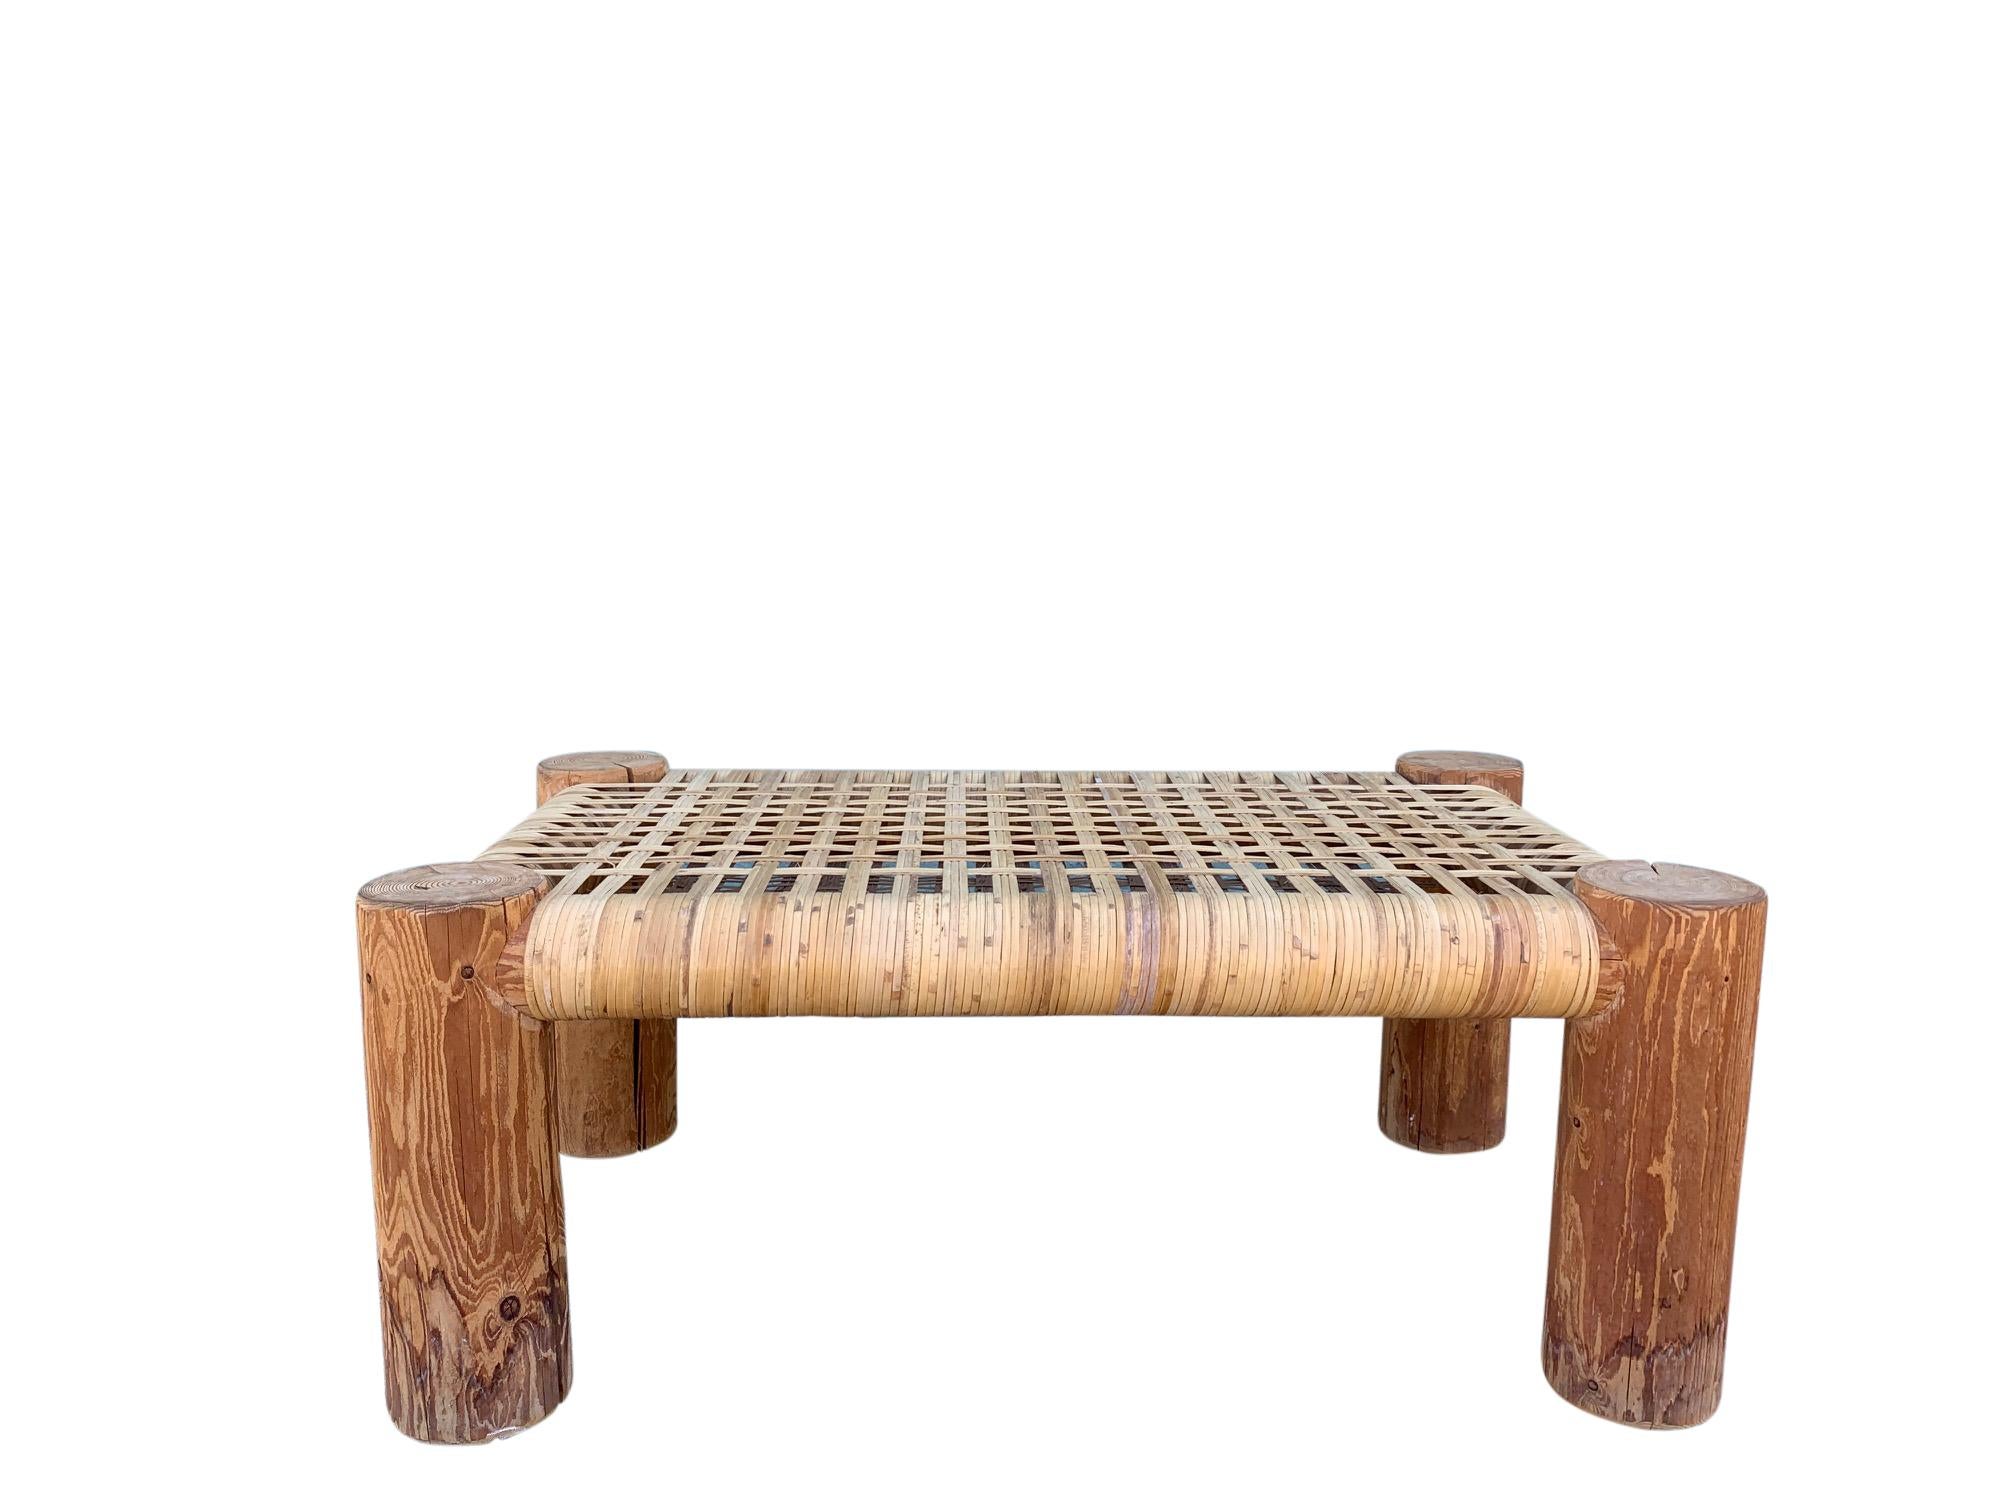 Cane Wicker Wrapped Modern Rustic Wood Bench Table In Good Condition For Sale In West Palm Beach, FL